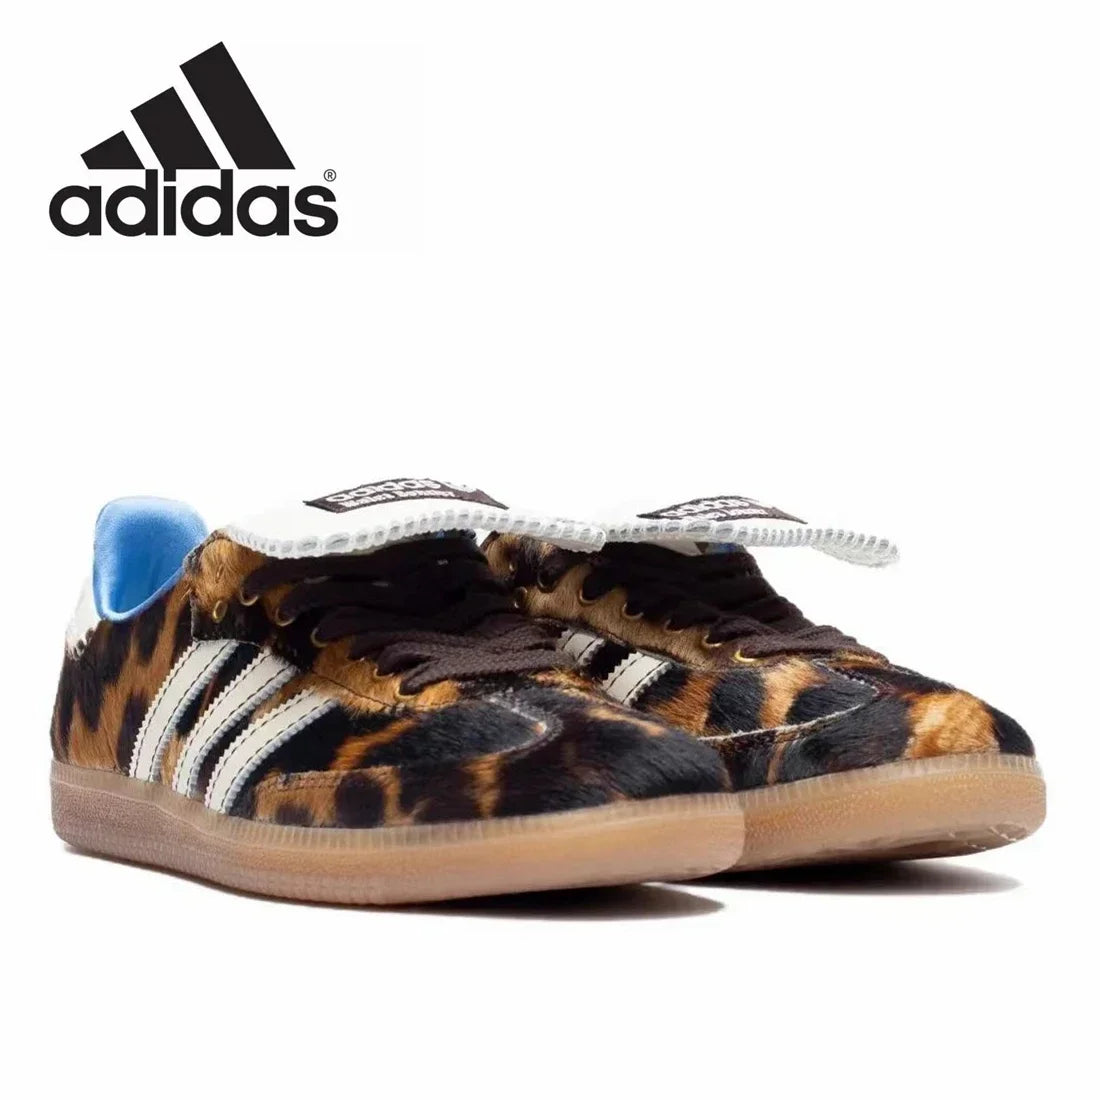 Adidas Samba Pony Wales Bonner Leopard German Training Gazelle Shoes Retro Versatile Sports and Casual Board Shoes sneakers